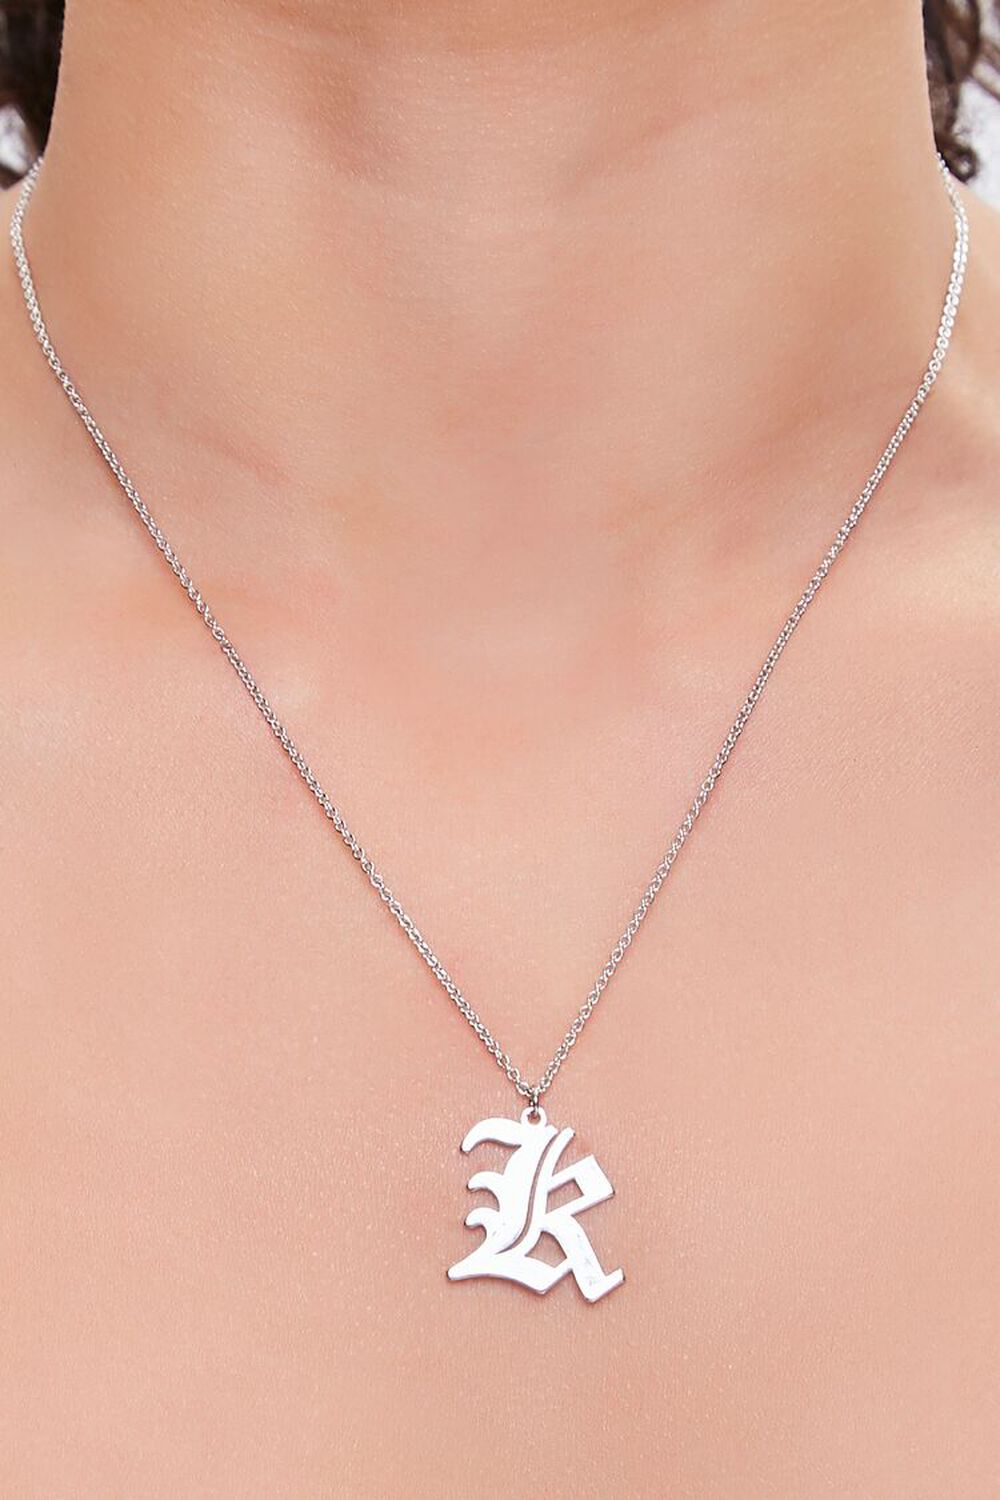 SILVER/K Initial Pendant Chain Necklace, image 1